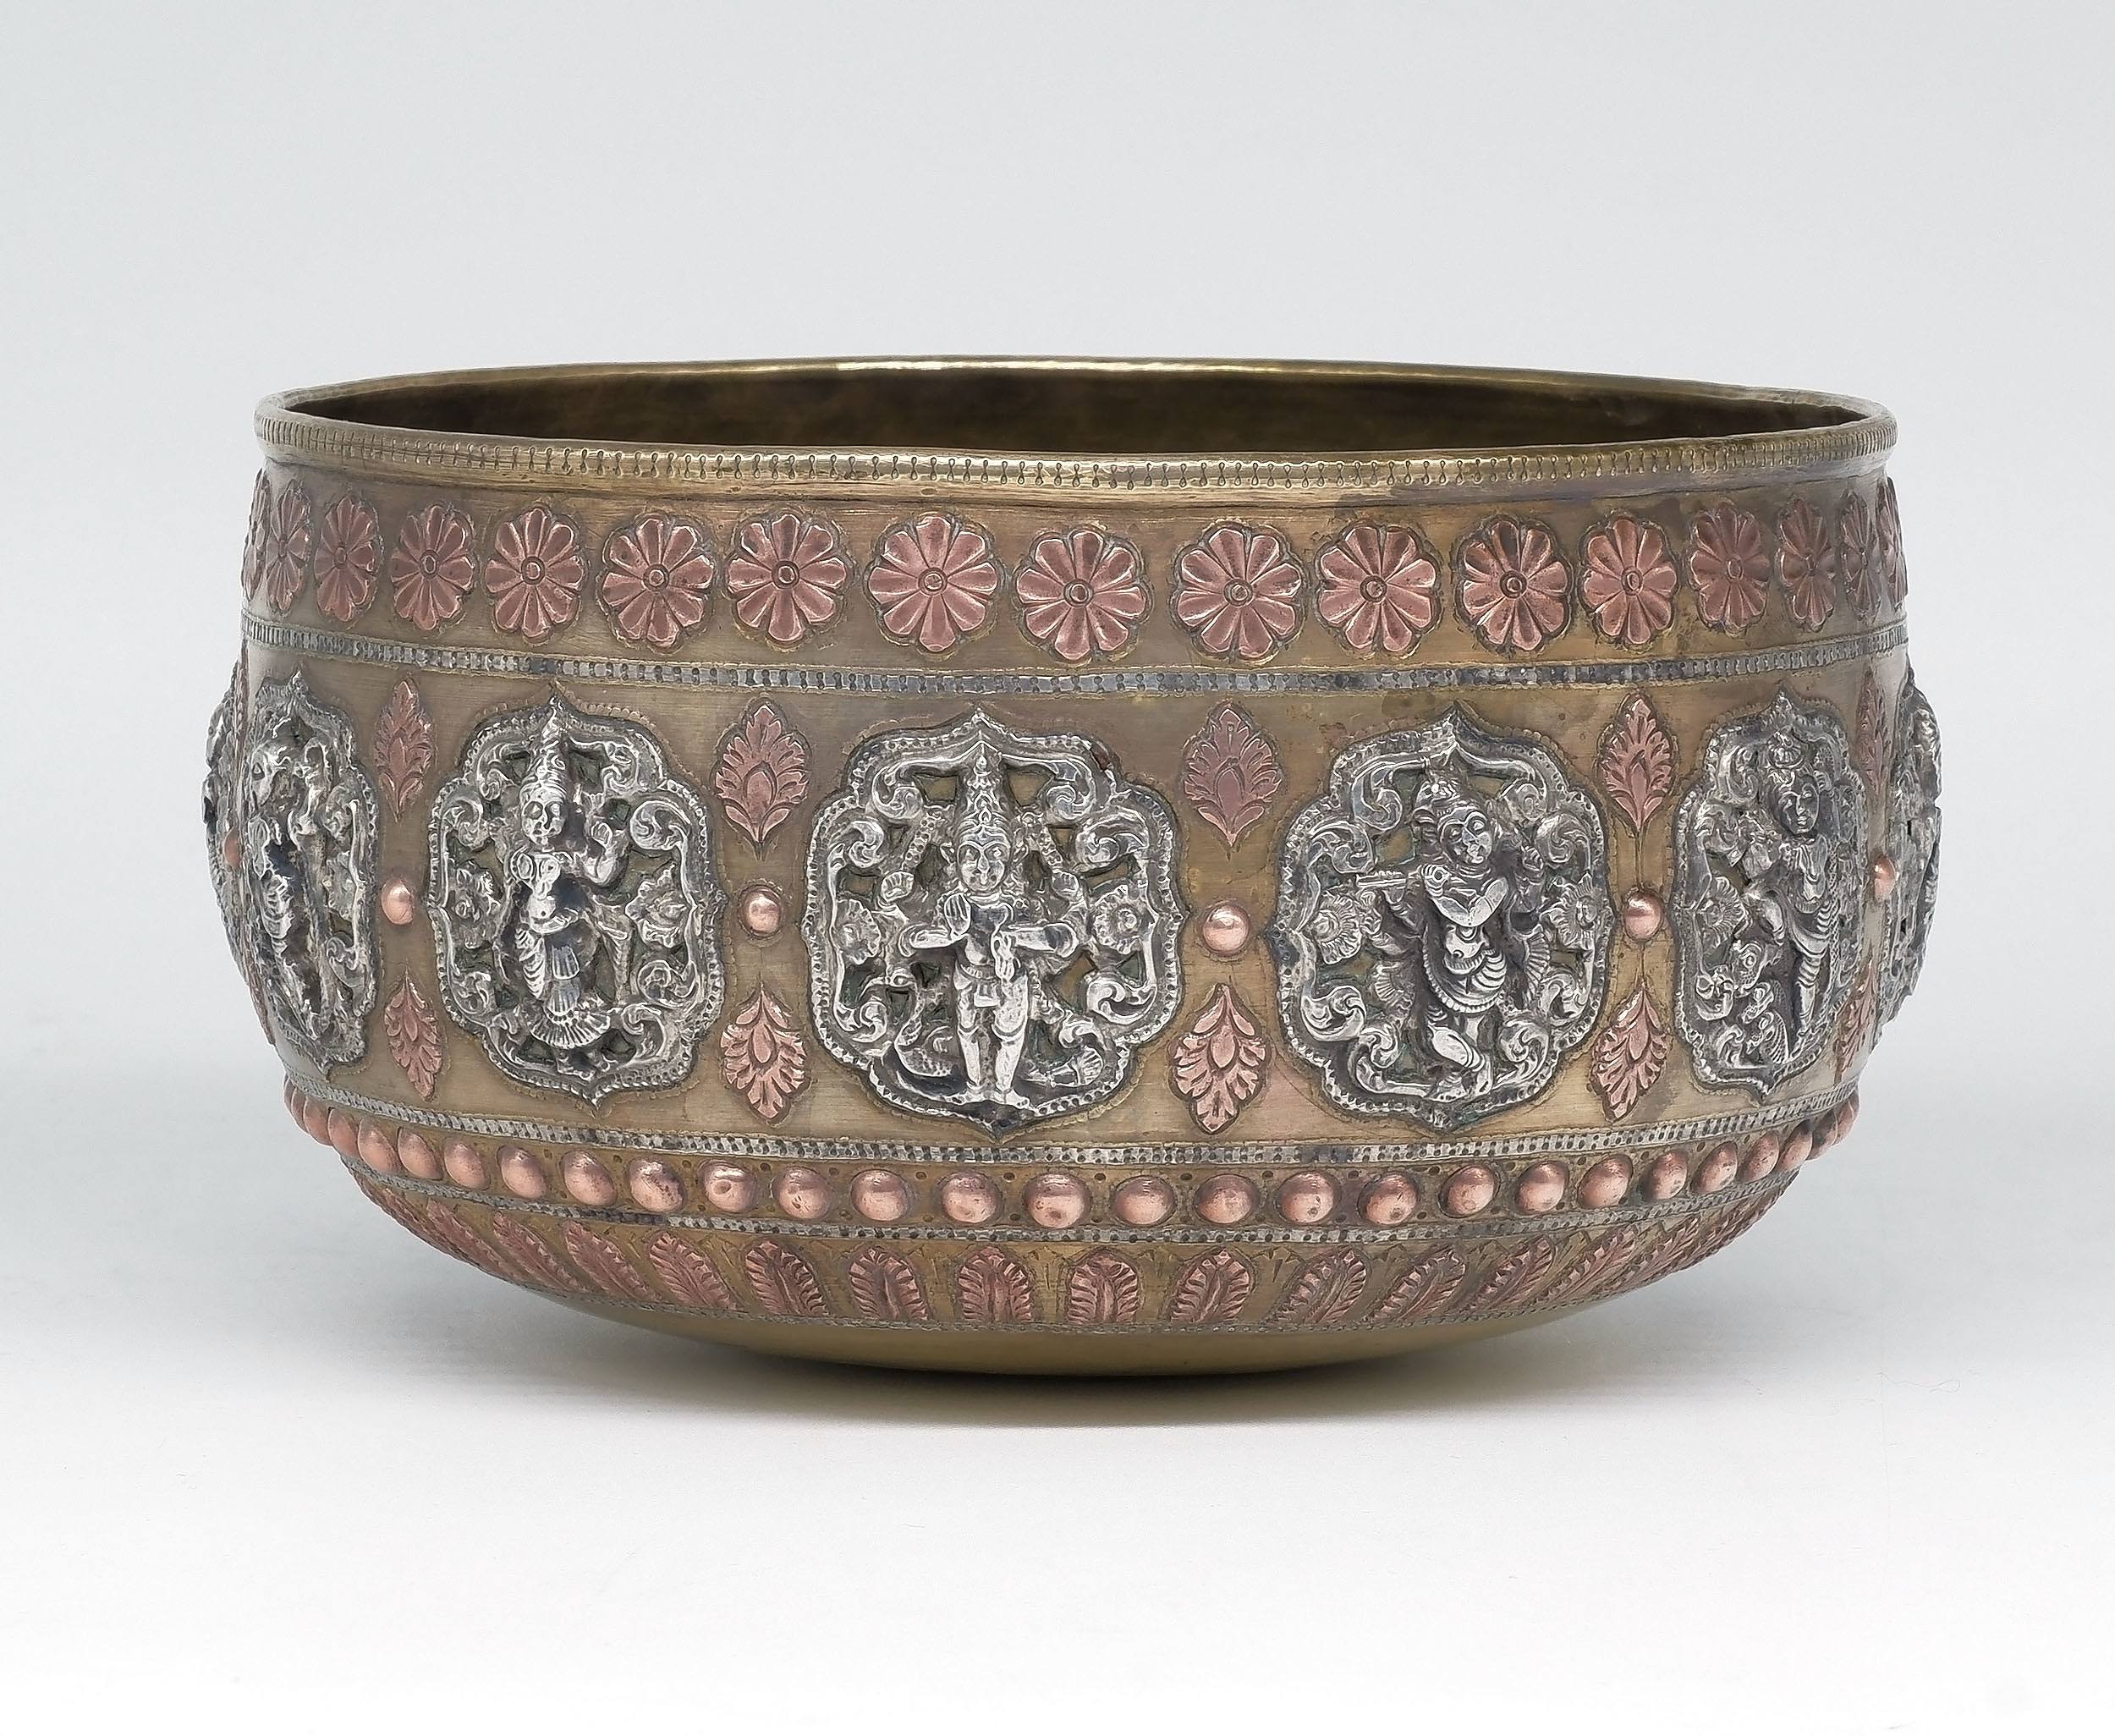 '19th Century Indian Silver and Copper Inlaid Brass Bowl'